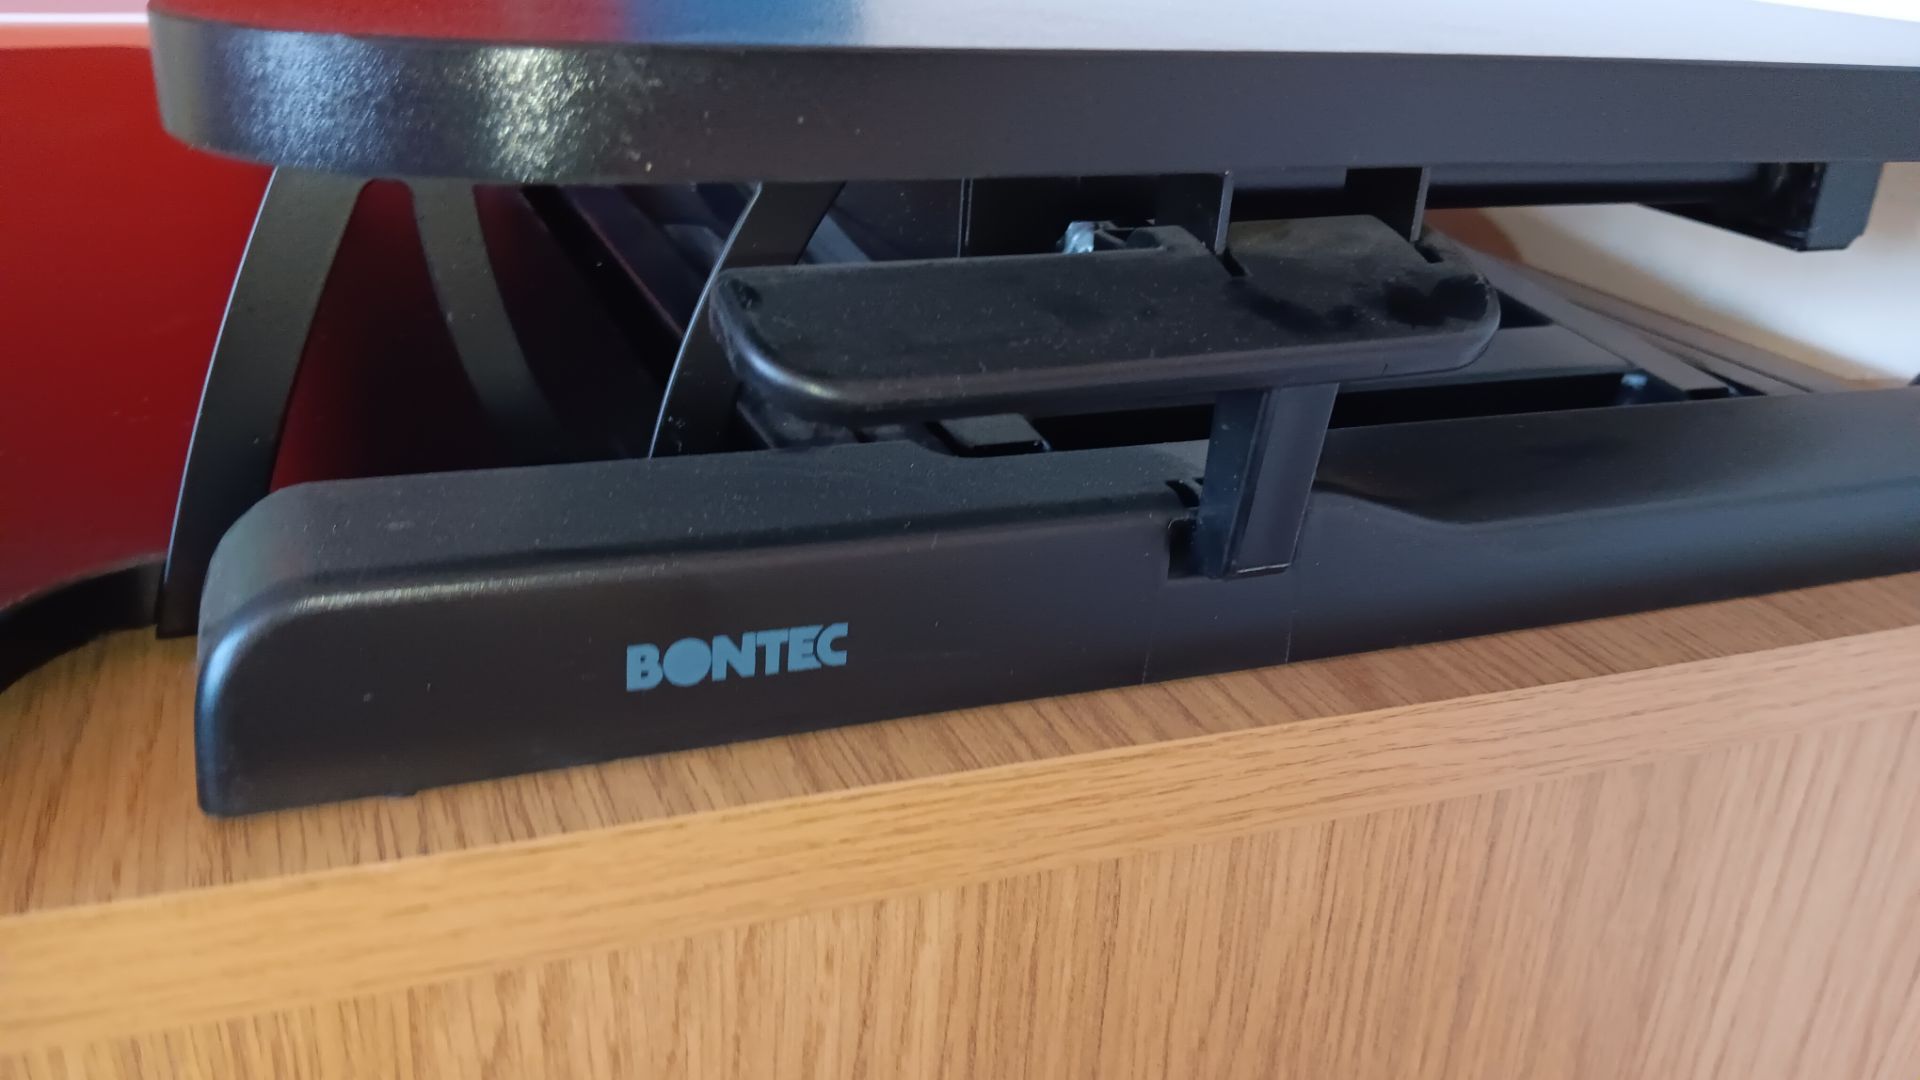 Bontec height adjustable sit/standing desk – Located Twyford, OX17 - Image 2 of 3